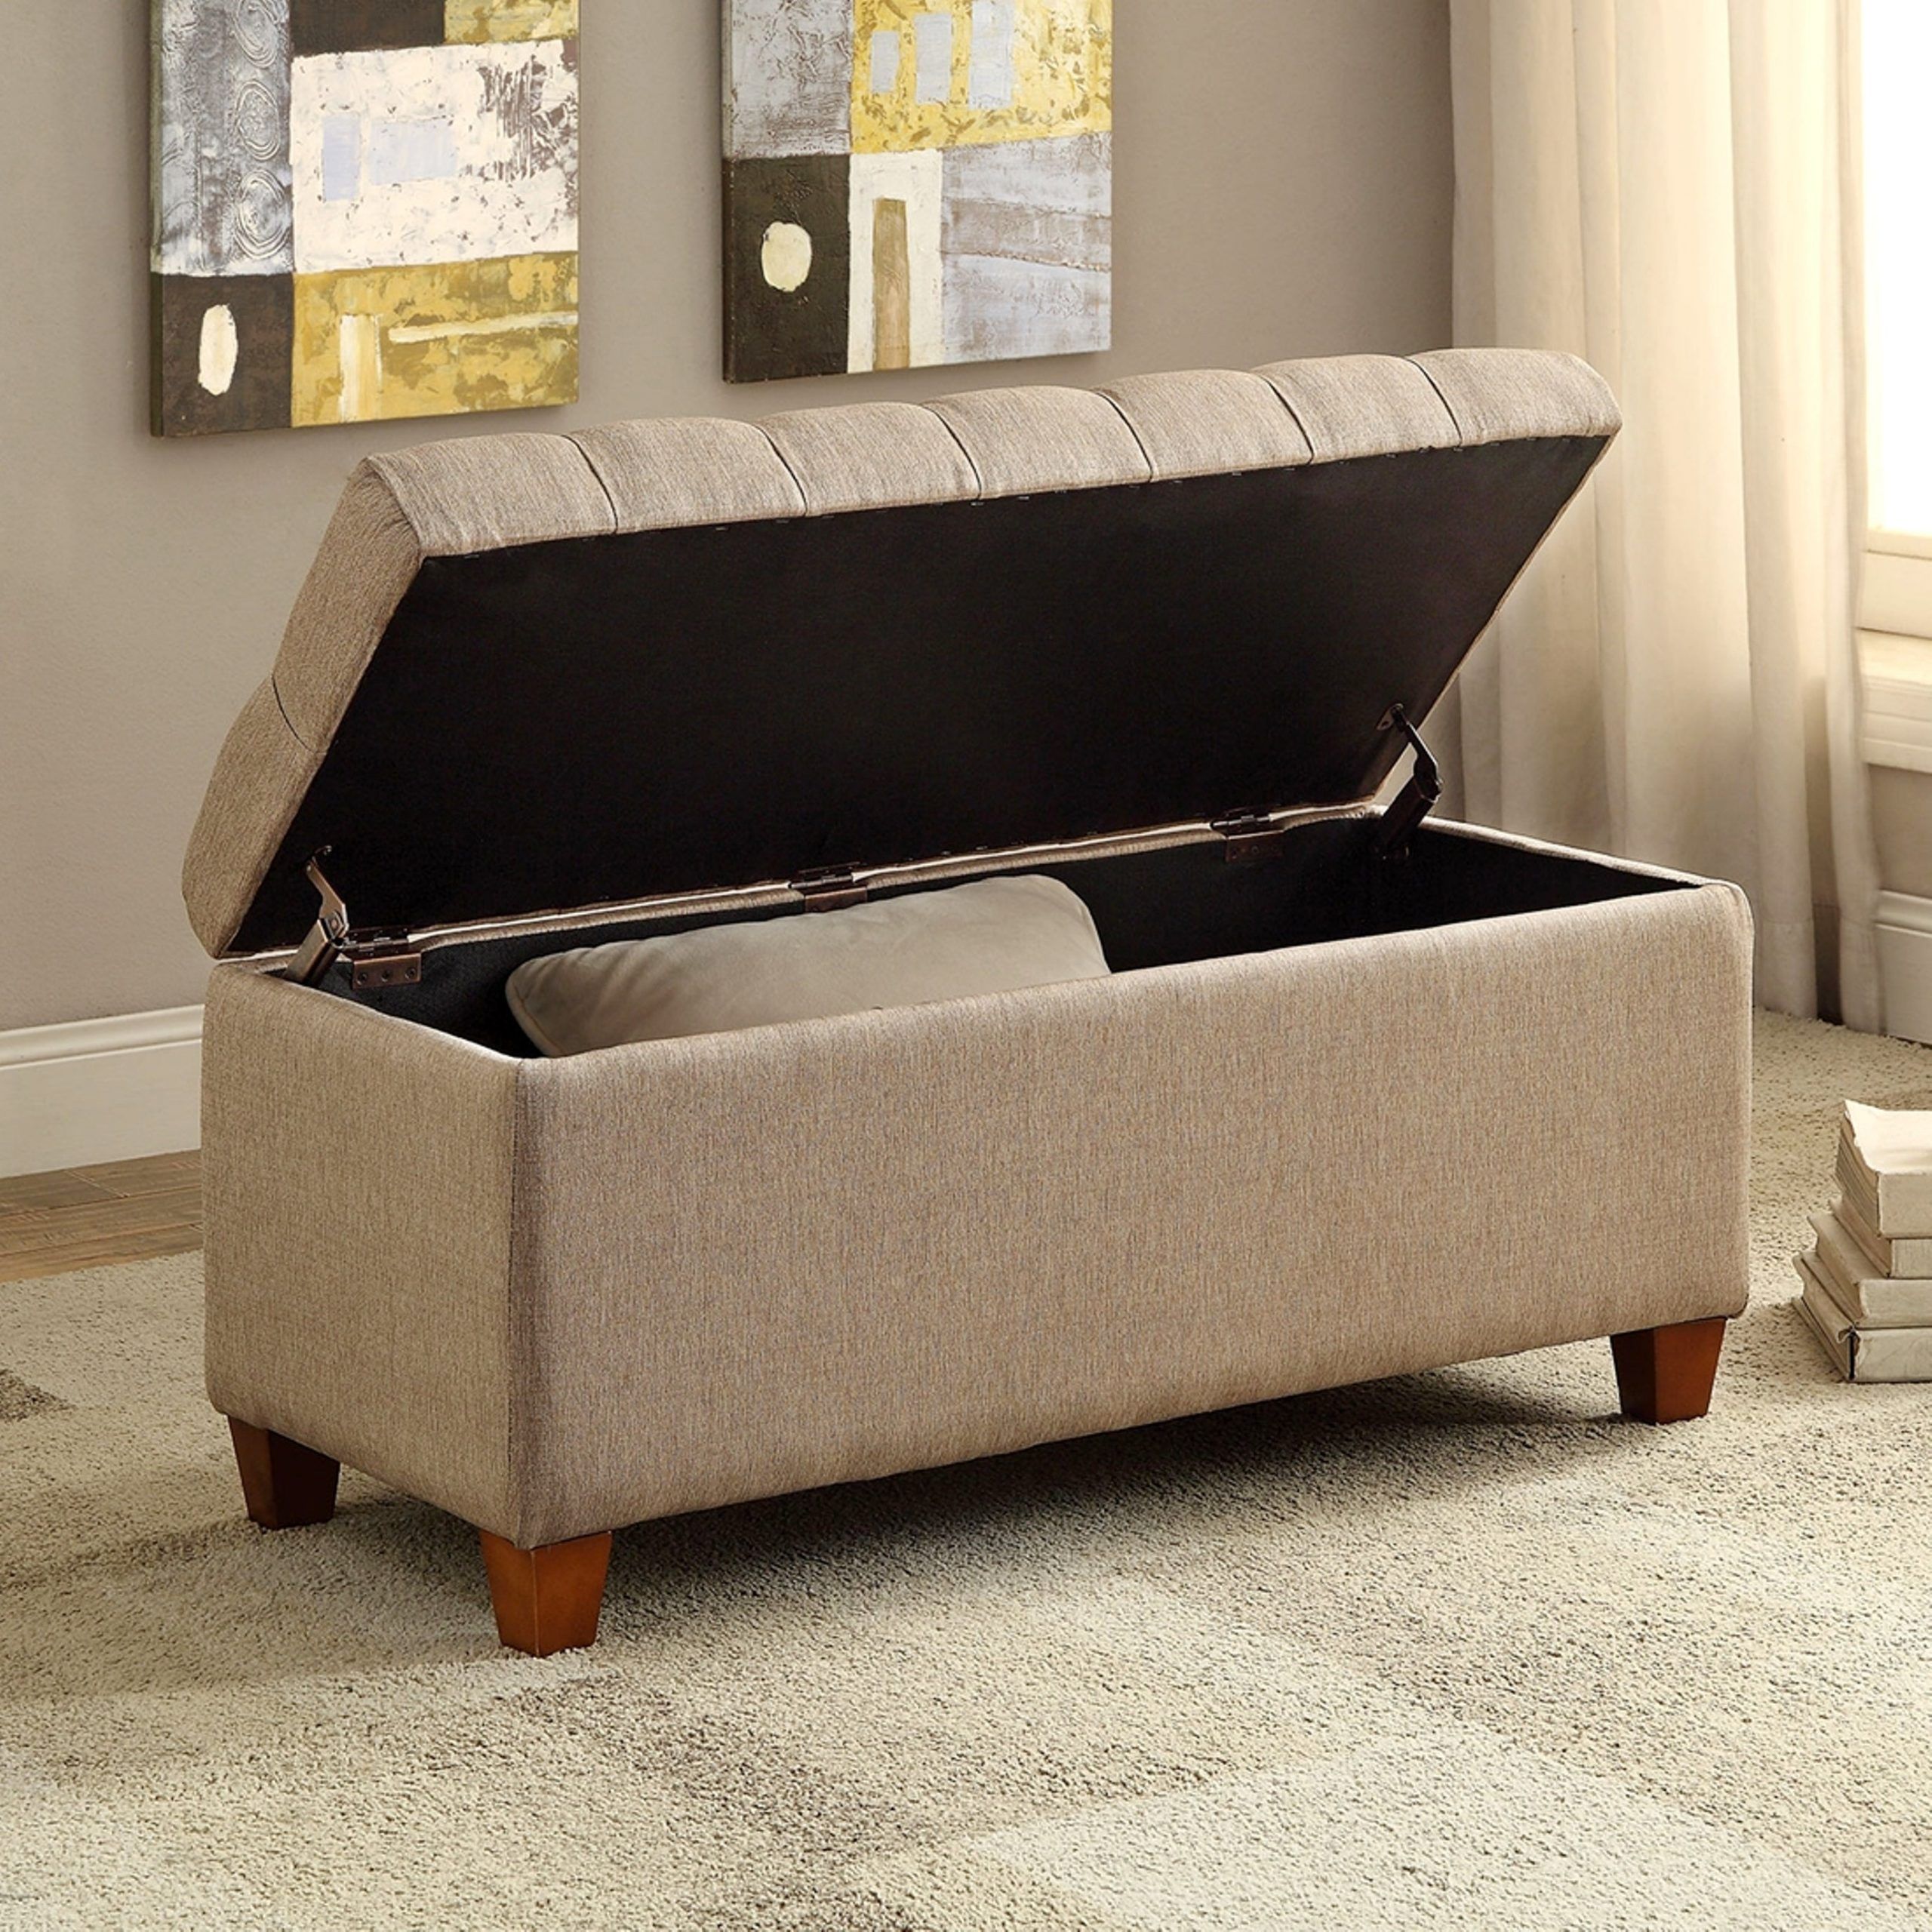 A Line Furniture Lankary Tufted Taupe Upholstered Storage Ottoman Bench With Tufted Ottoman Console Tables (View 12 of 20)